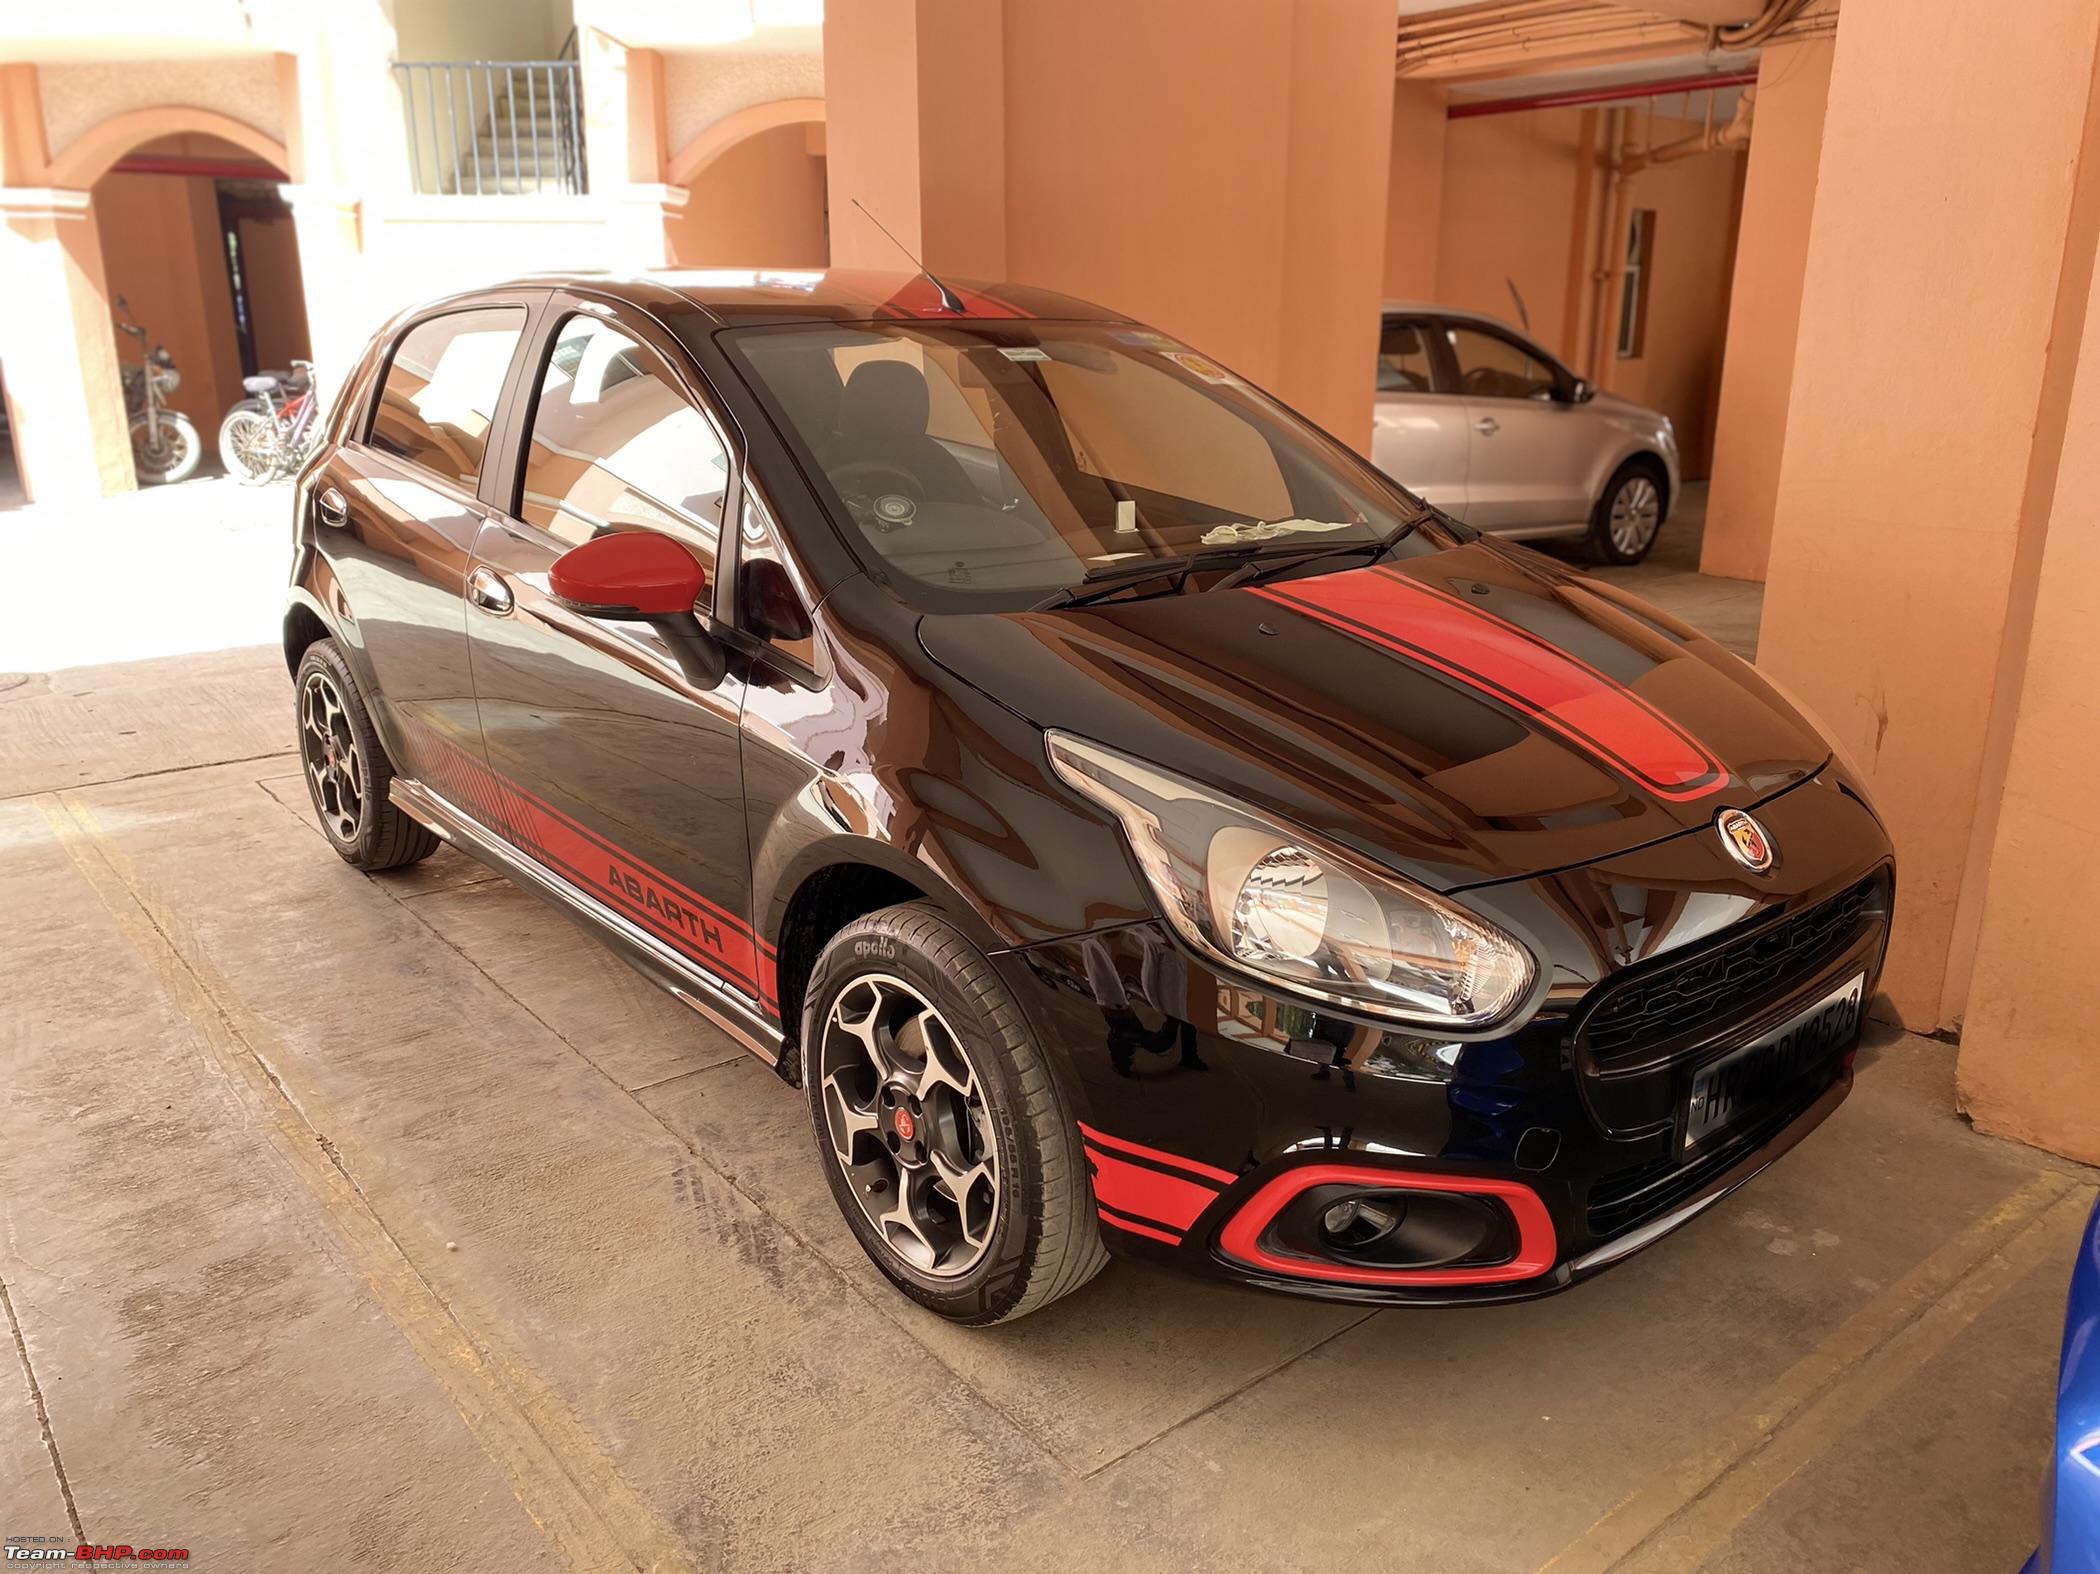 Hotter Hatches: Abarth Rolls Out Special Edition Fiat 500, Punto Models